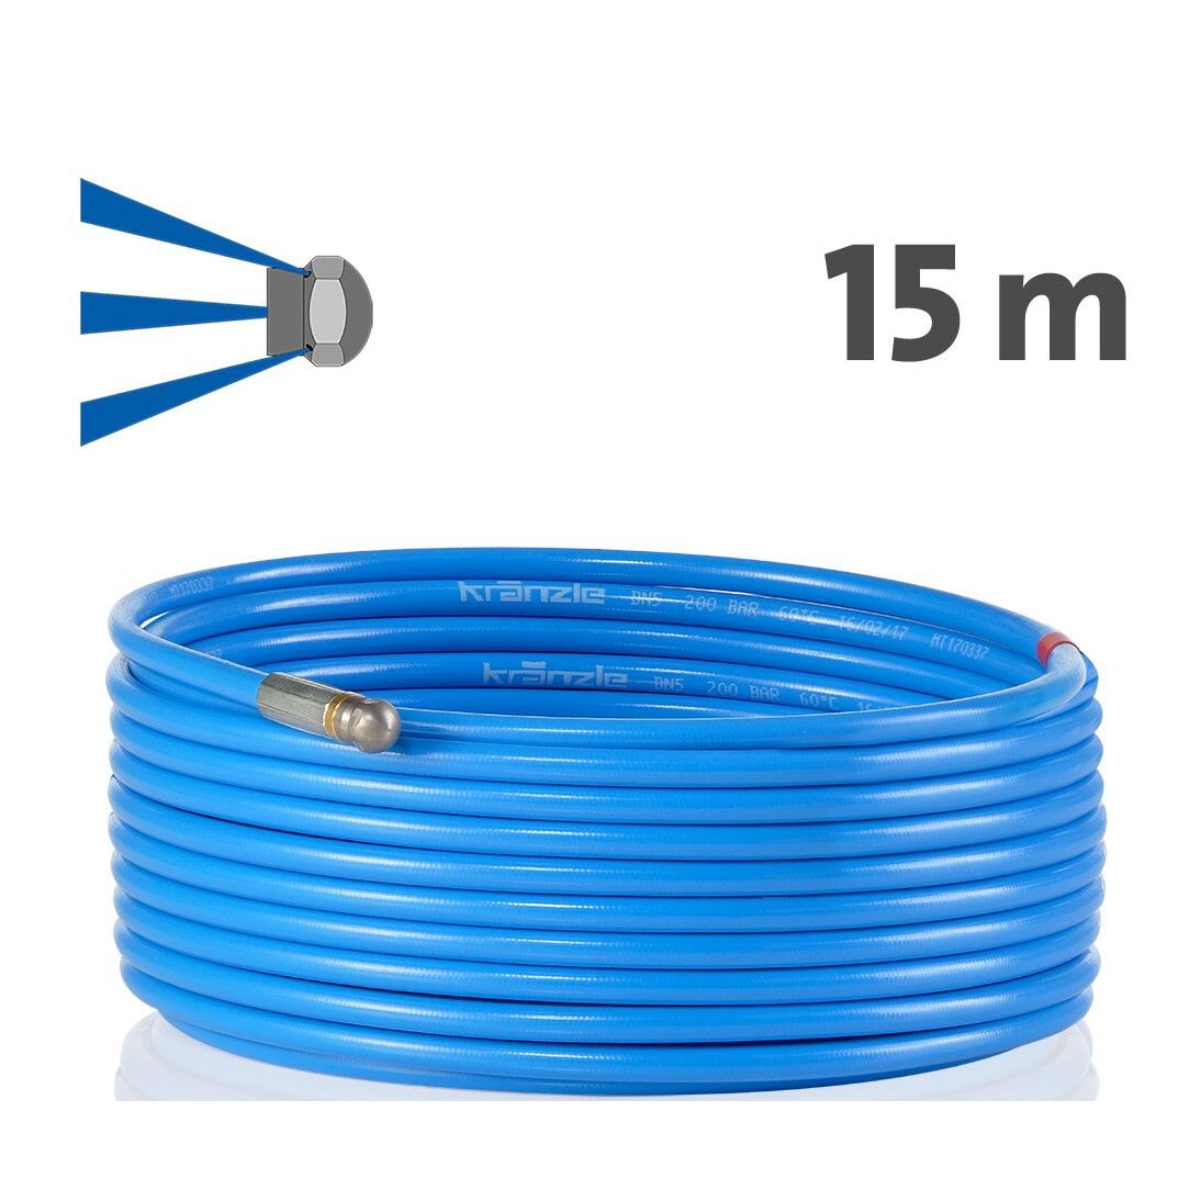 41058 - Drain Cleaning Hose 15m